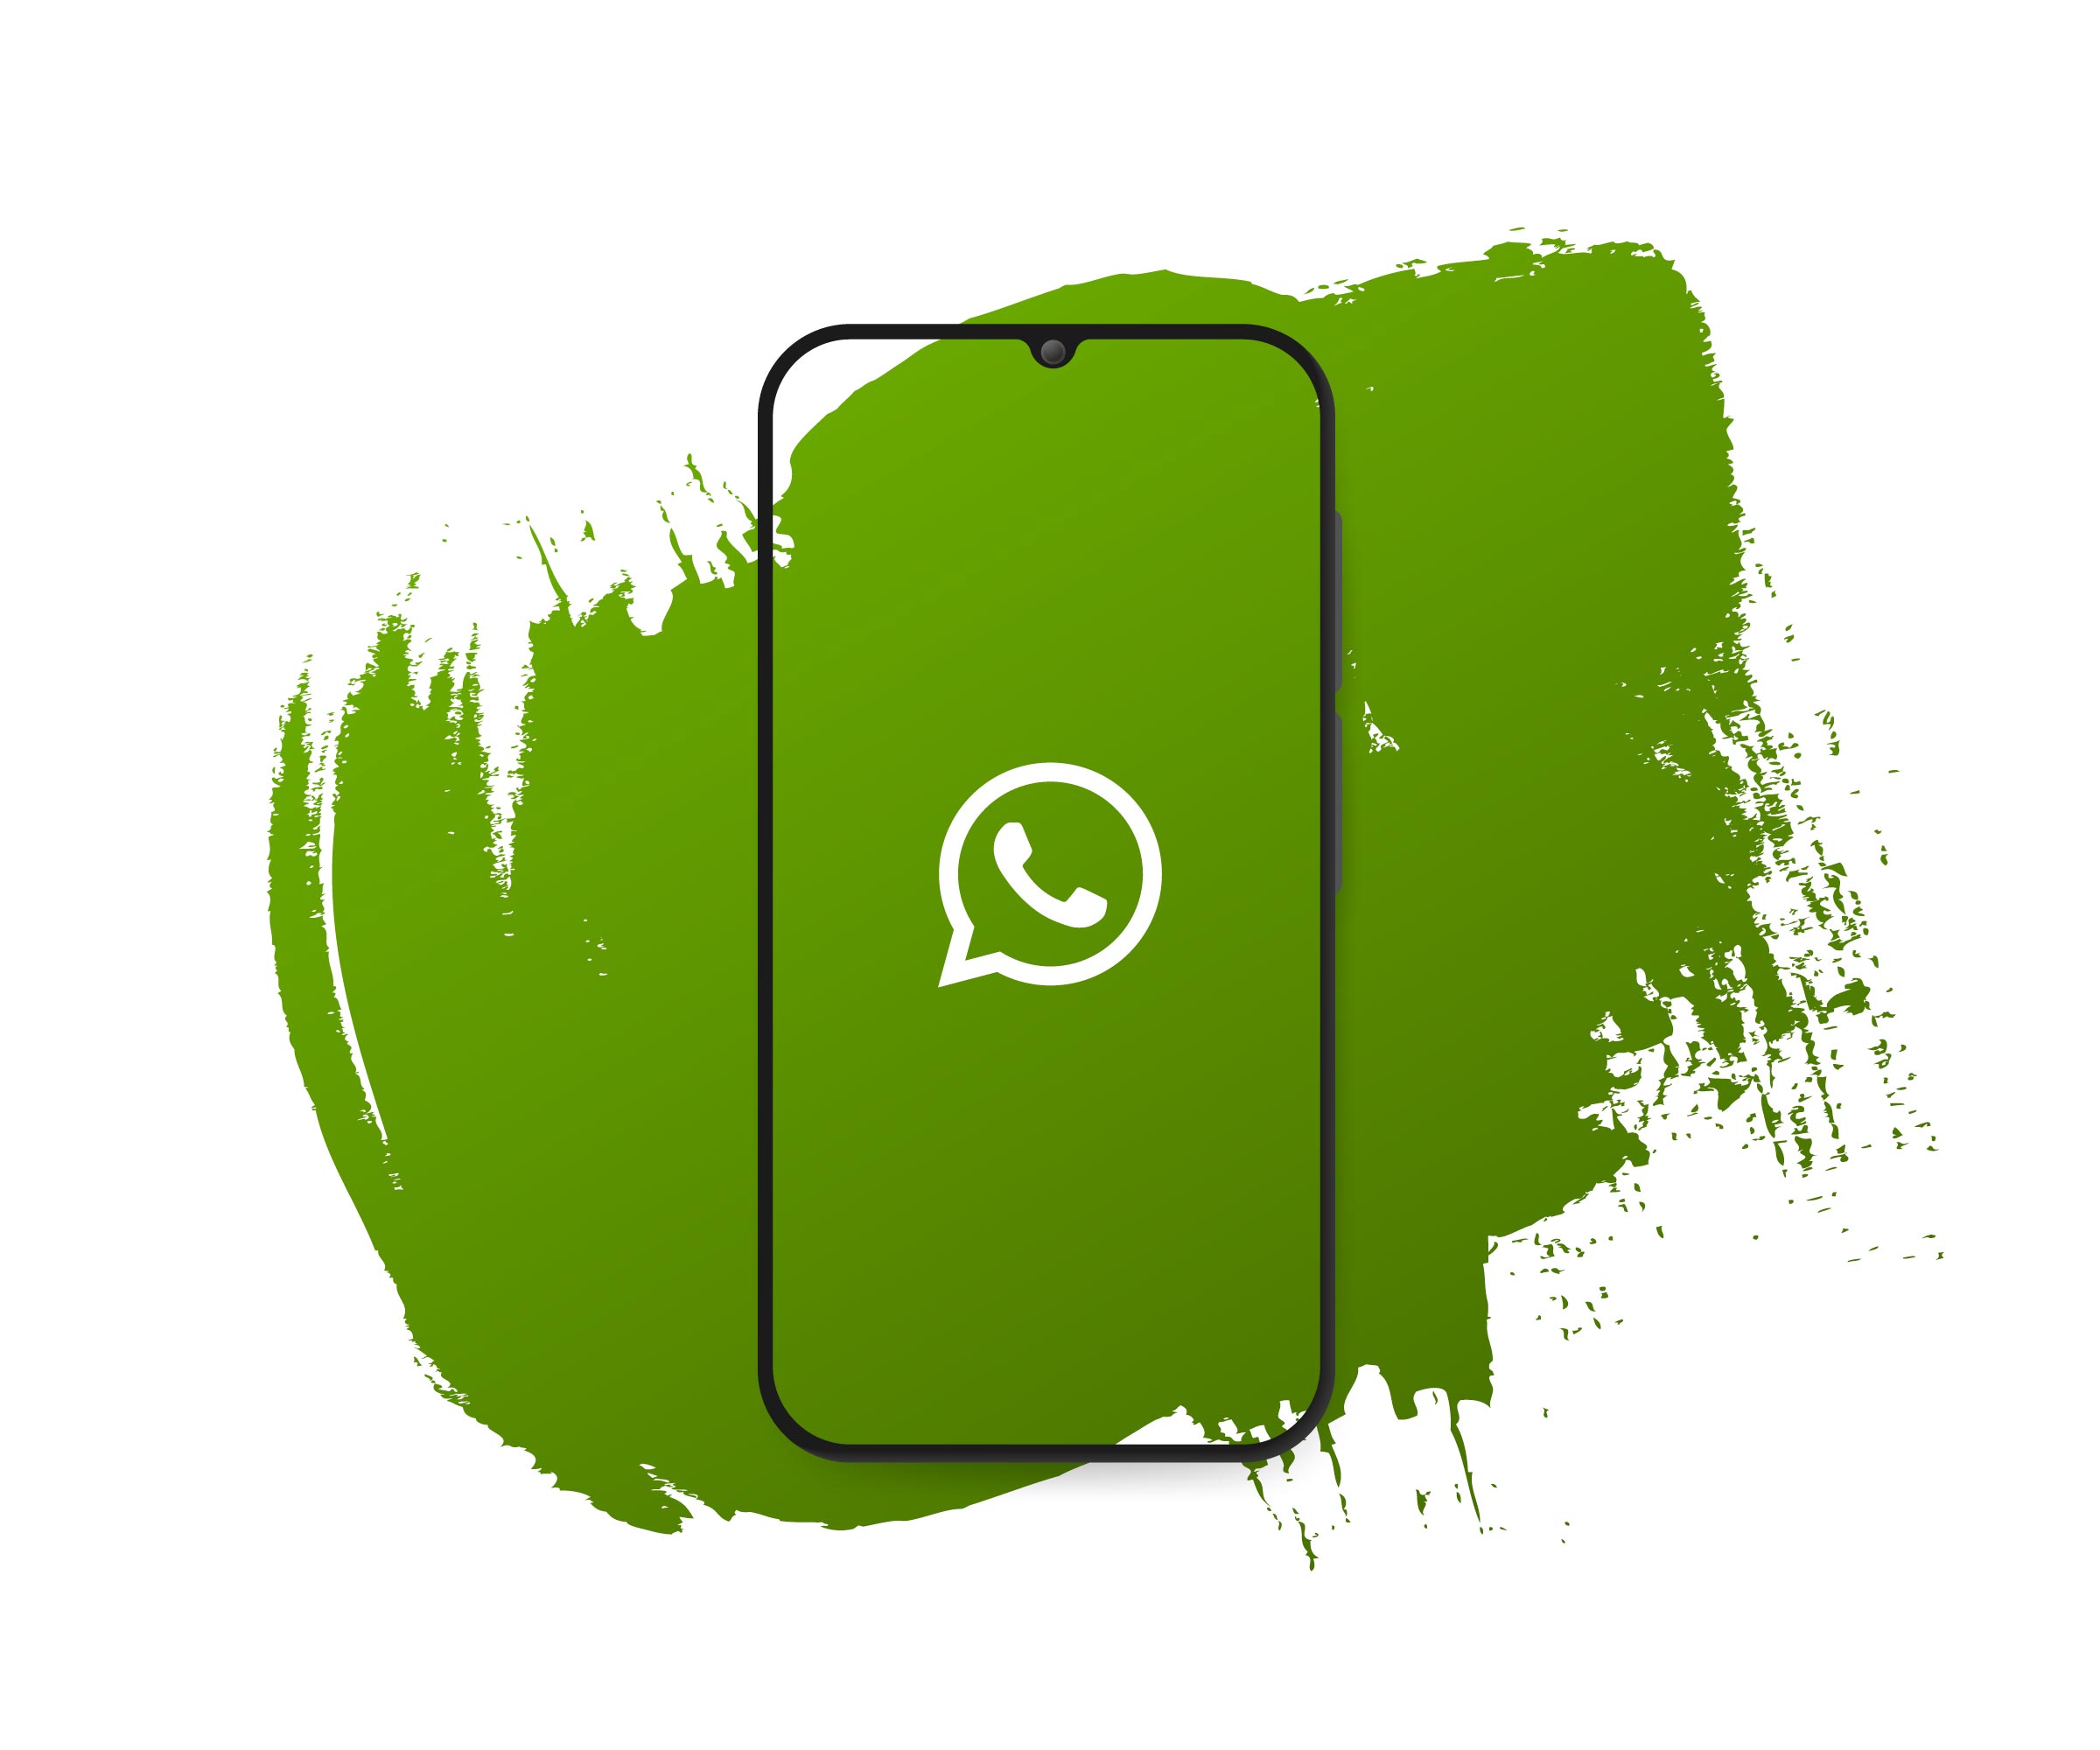 WhatsApp has rolled out 2 new features for Andorid and iOS devices